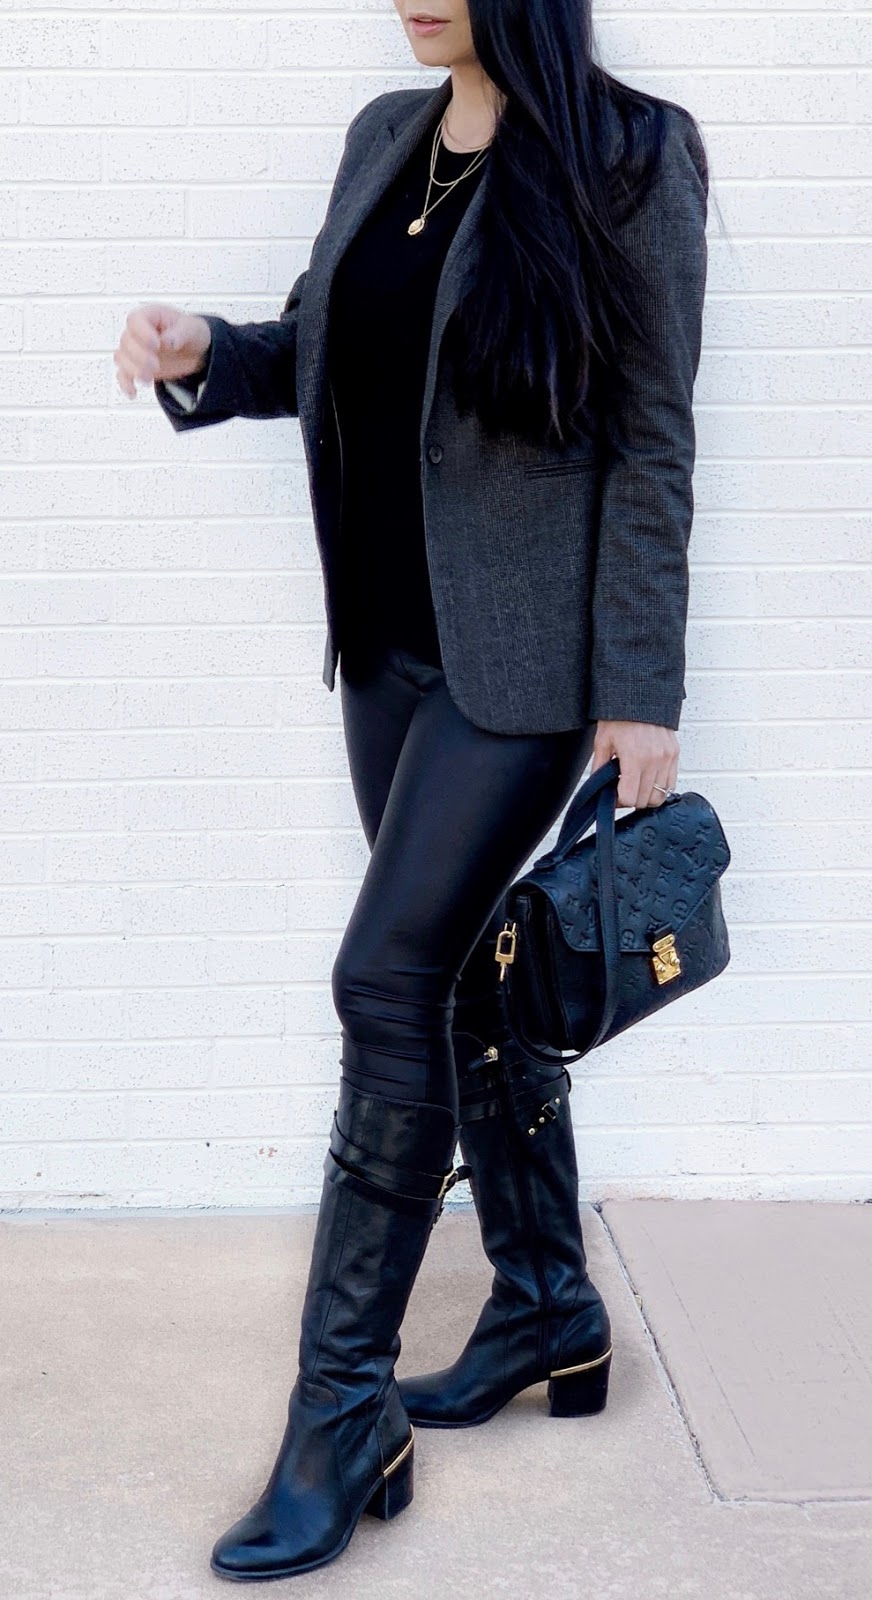 The perfect pair of Riding Boots with Gold Hardware Detail, paired with faux leather leggings, comfy top and chic plaid blazer www.MalenaHaas.com